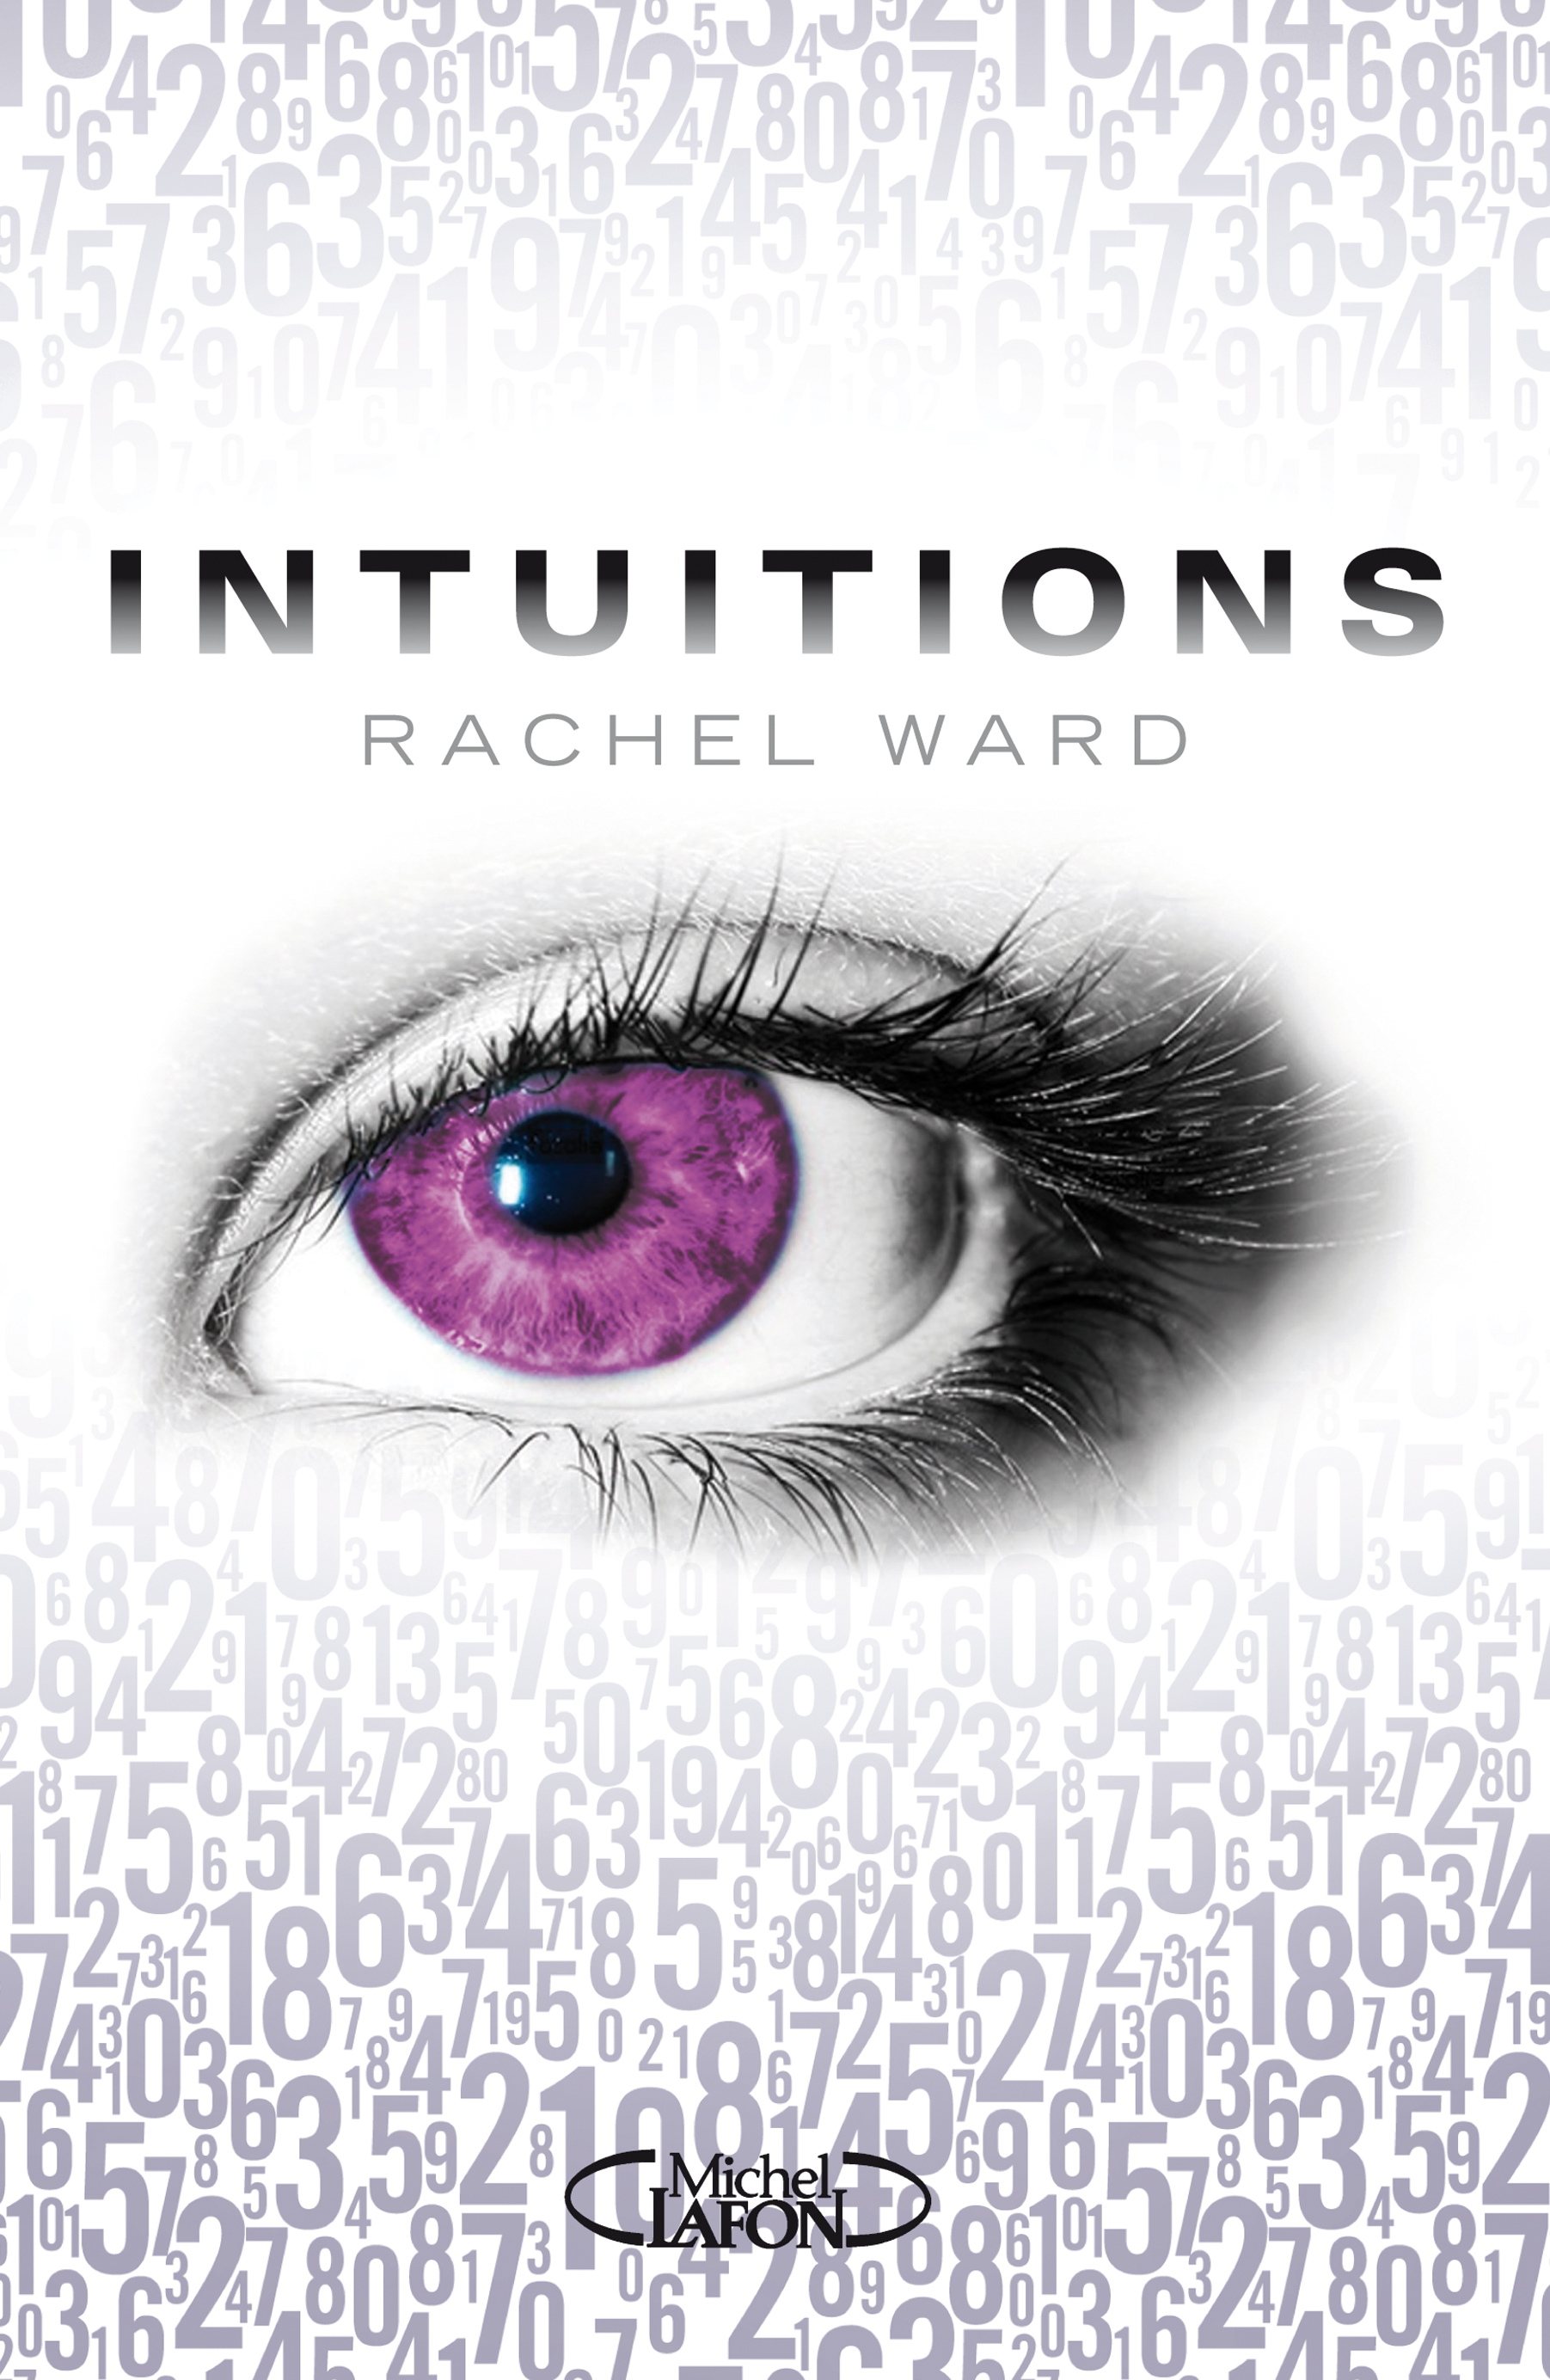 Intuitions – Tome 1